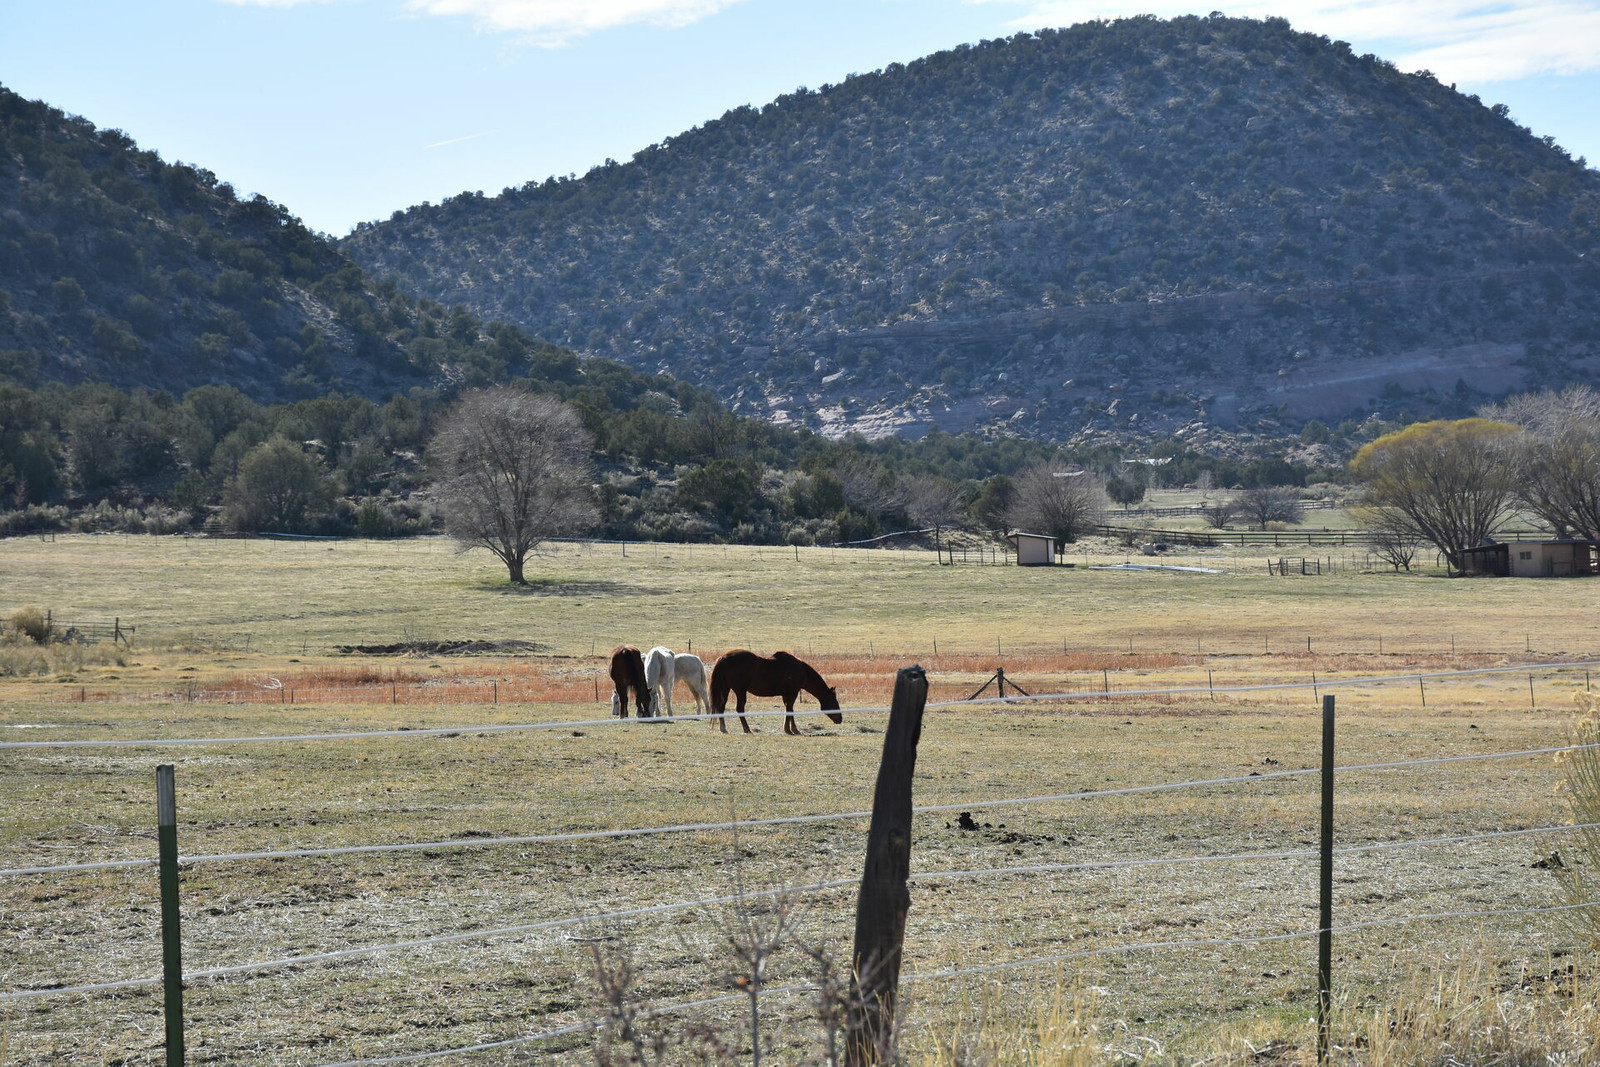 A field with three horses grazing in it. A large hill covered in brush is in the background.